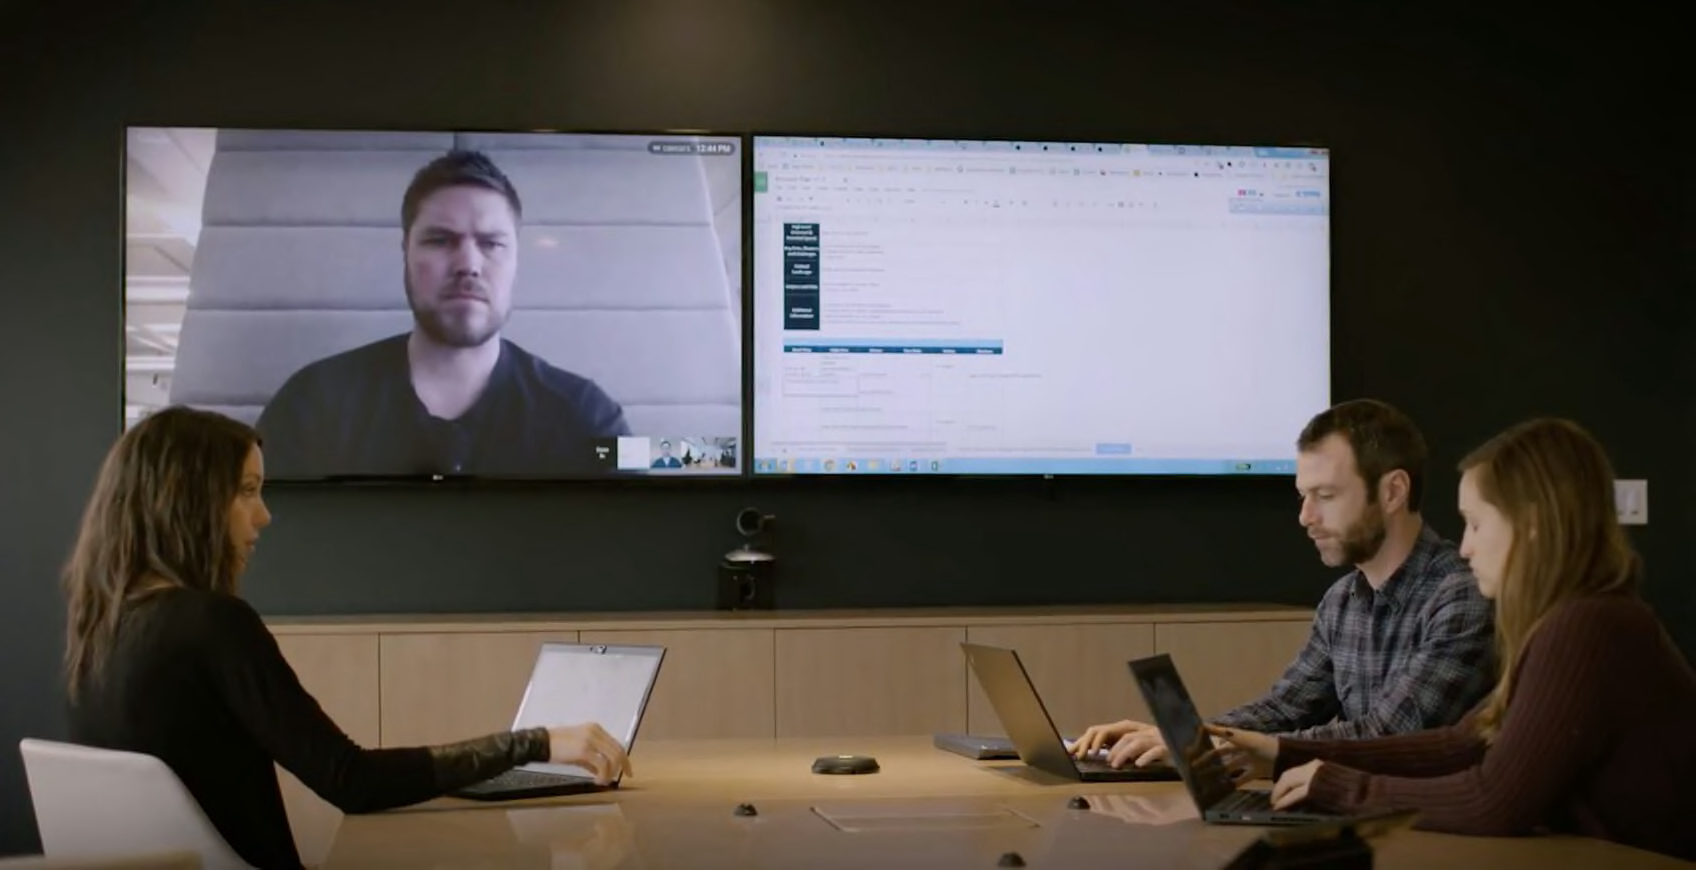 Quantcast uses Logitech solutions to make video conference